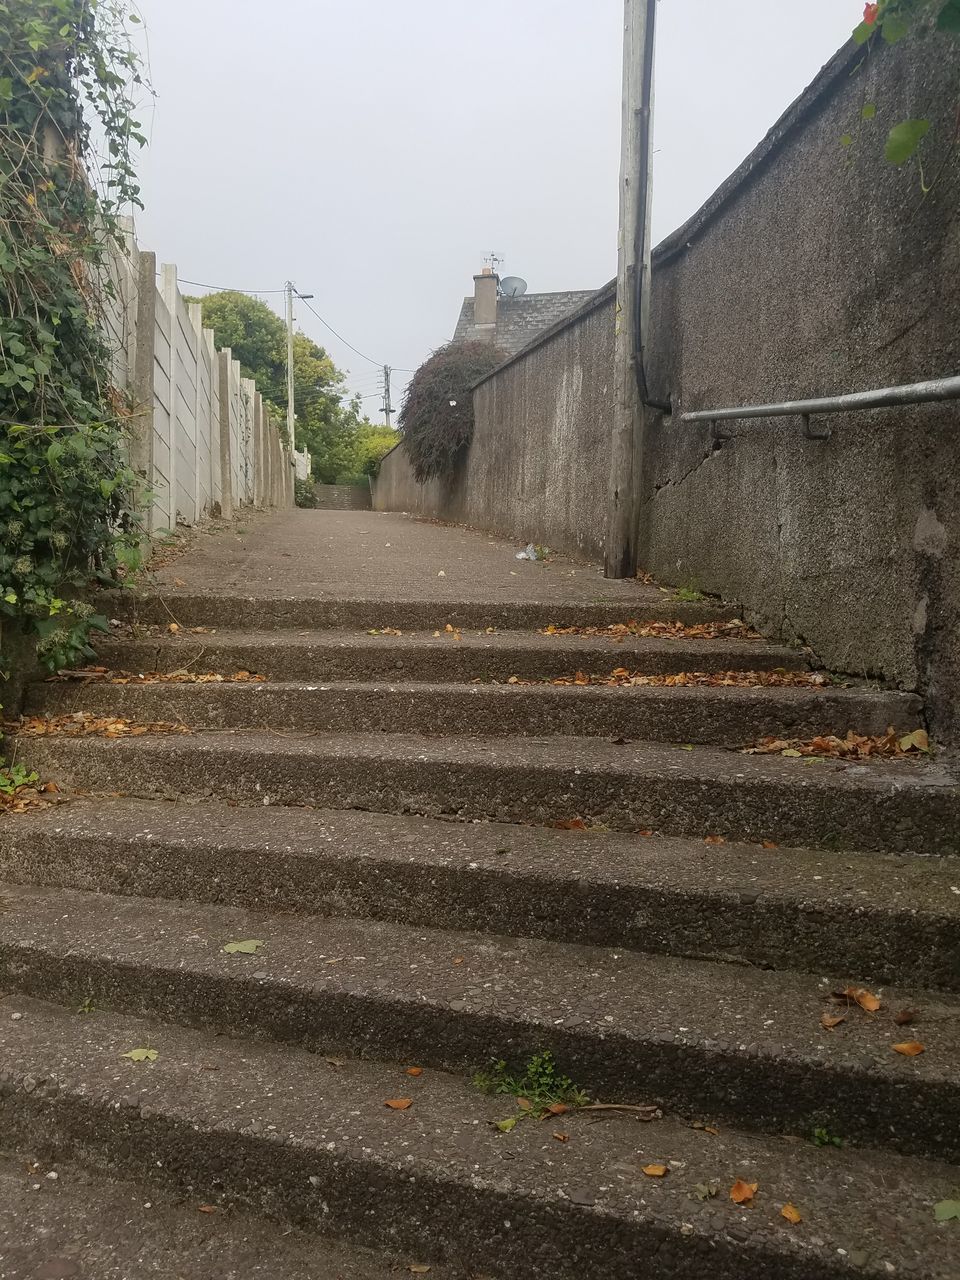 LOW ANGLE VIEW OF STEPS AMIDST BUILDINGS